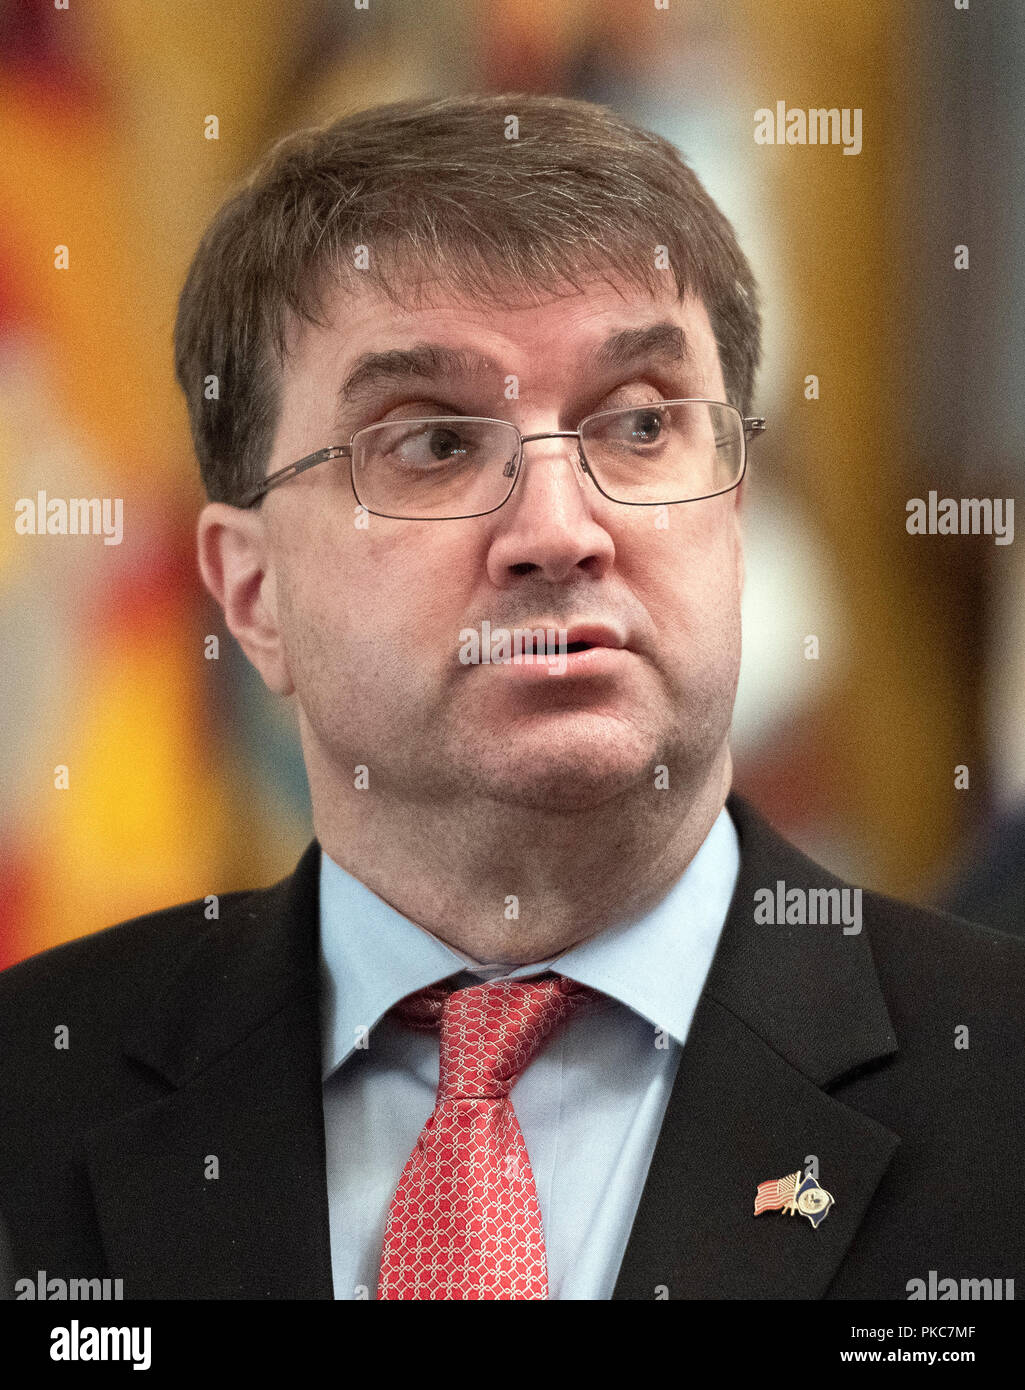 Washington, United States Of America. 12th Sep, 2018. United States Secretary of Veterans Affairs Robert Wilkie, prior to the arrival of US President Donald J. Trump who will make remarks at the Congressional Medal of Honor Society Reception in the East Room of the White House in Washington, DC on Wednesday, September 12, 2018. Credit: Ron Sachs/CNP | usage worldwide Credit: dpa/Alamy Live News Stock Photo